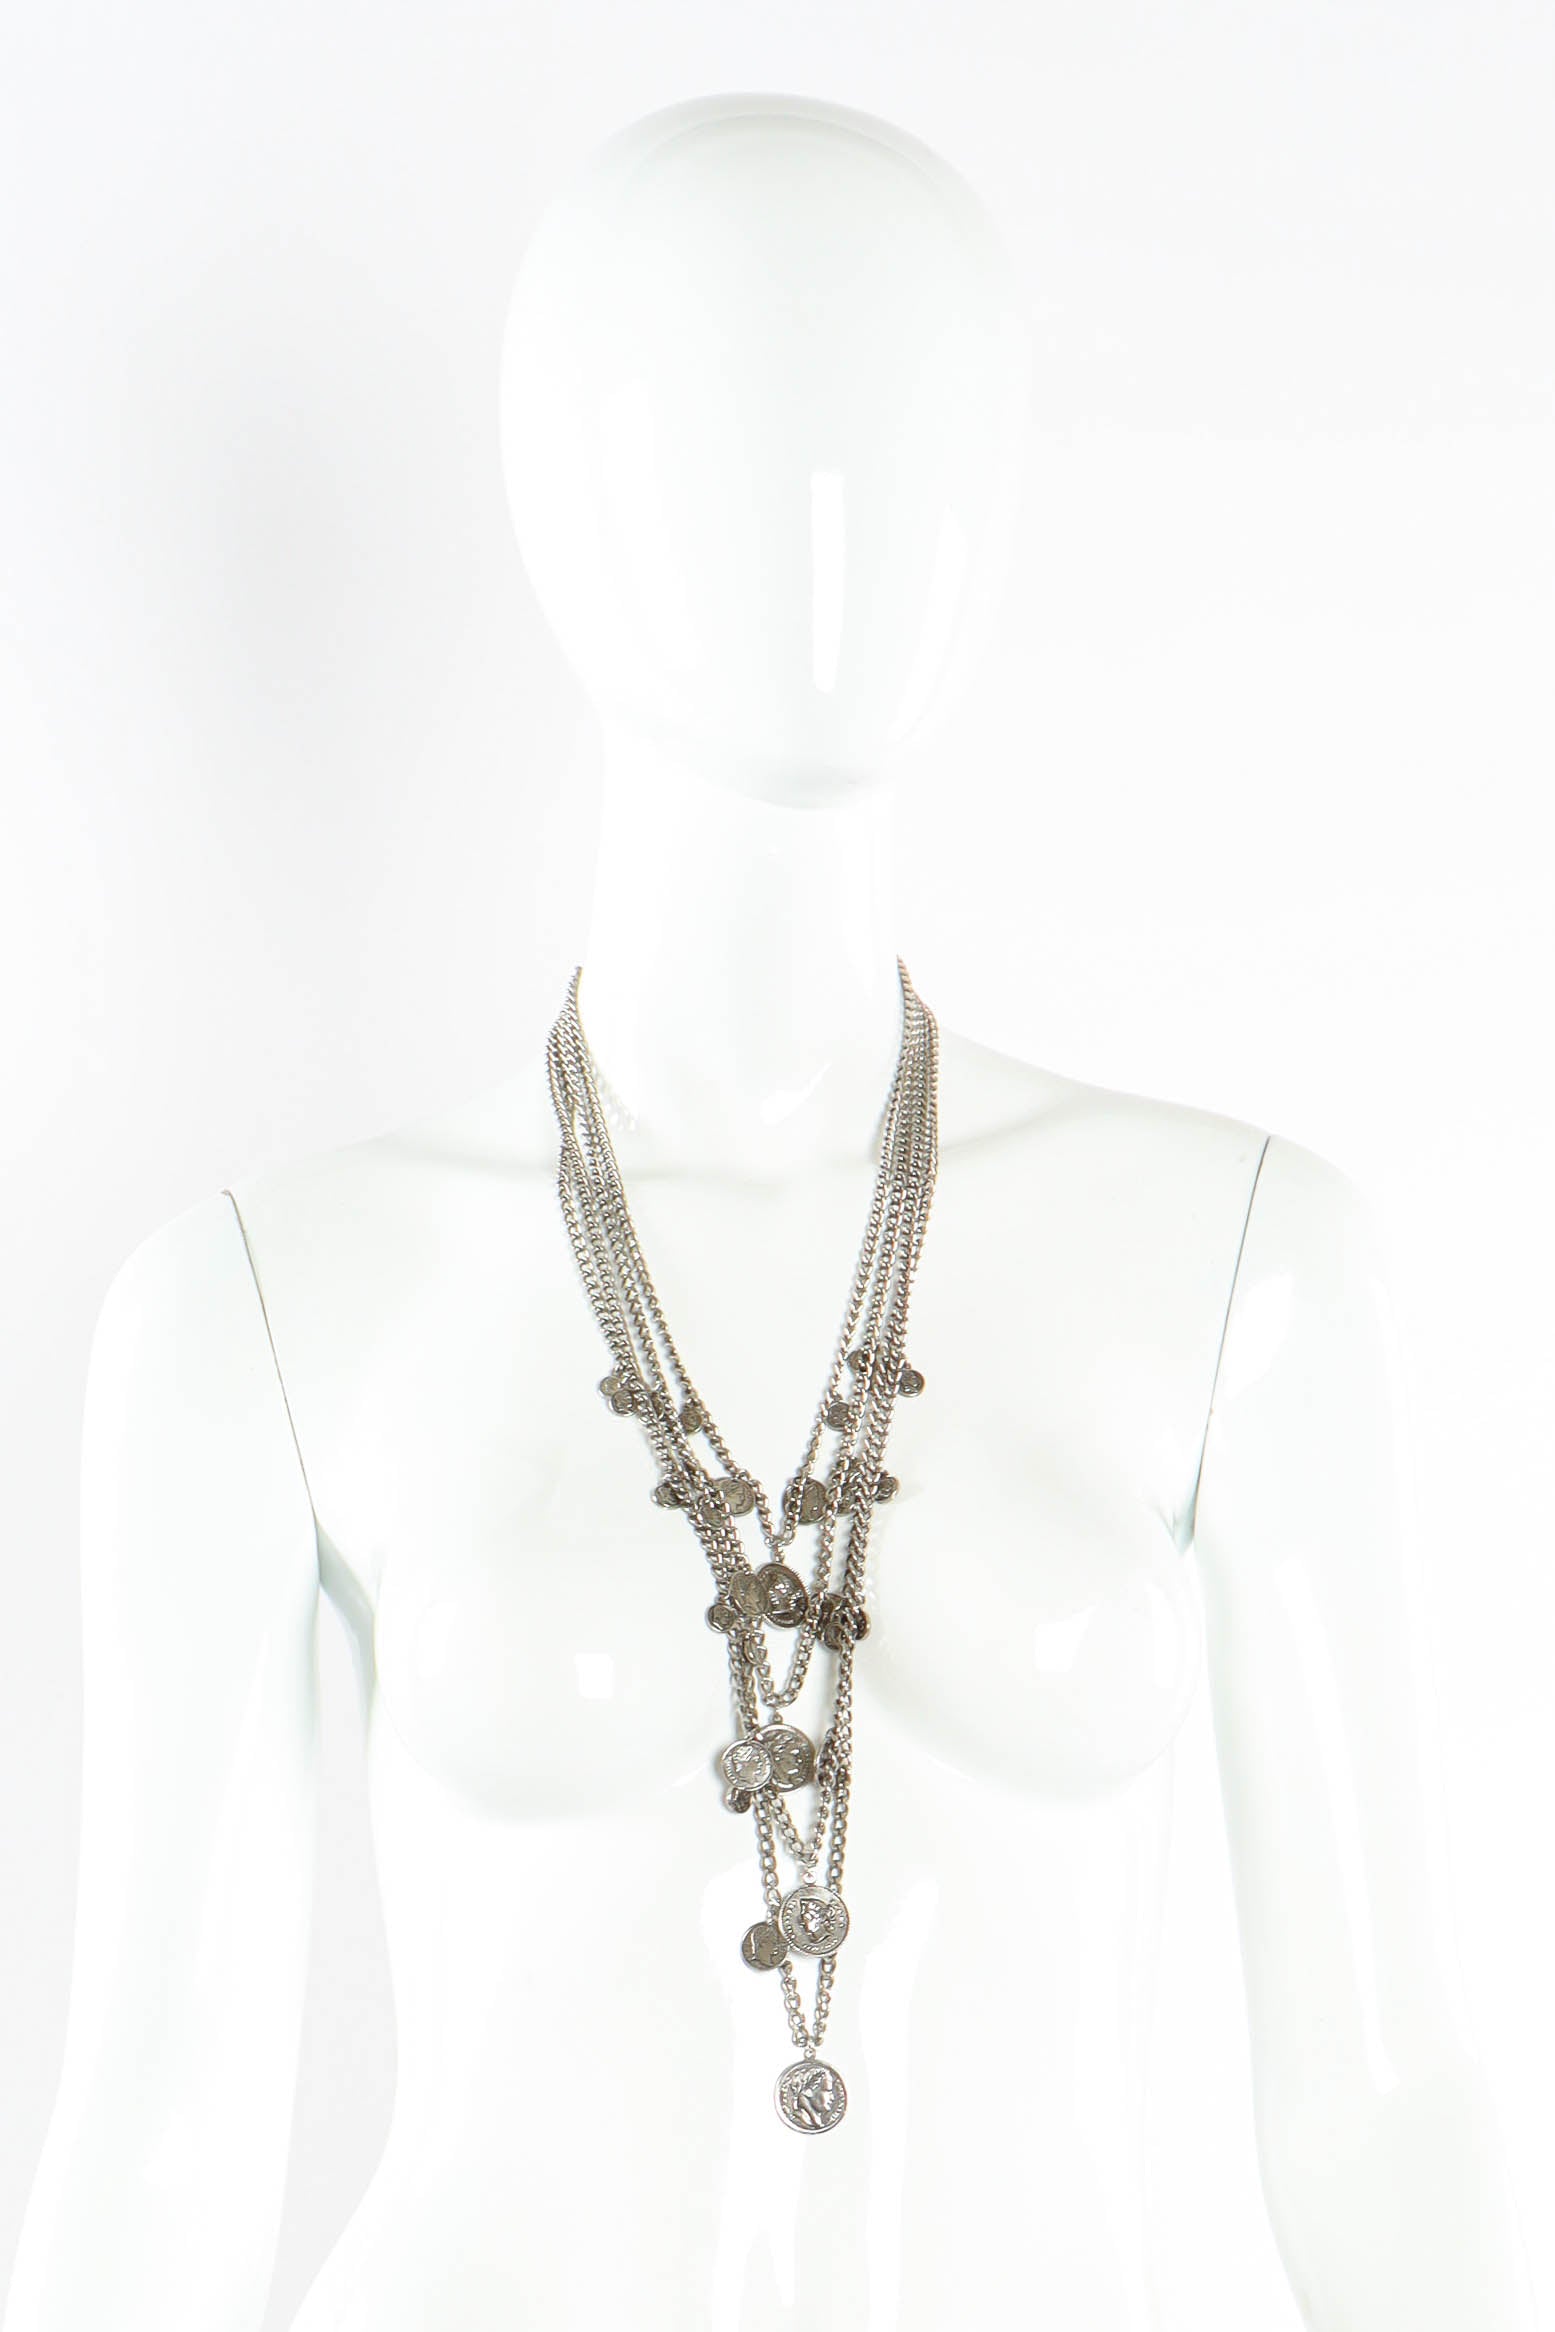 Vintage Goldette Multi-Strand Layered Coin Necklace lll mannequin @ Recess Los Angeles